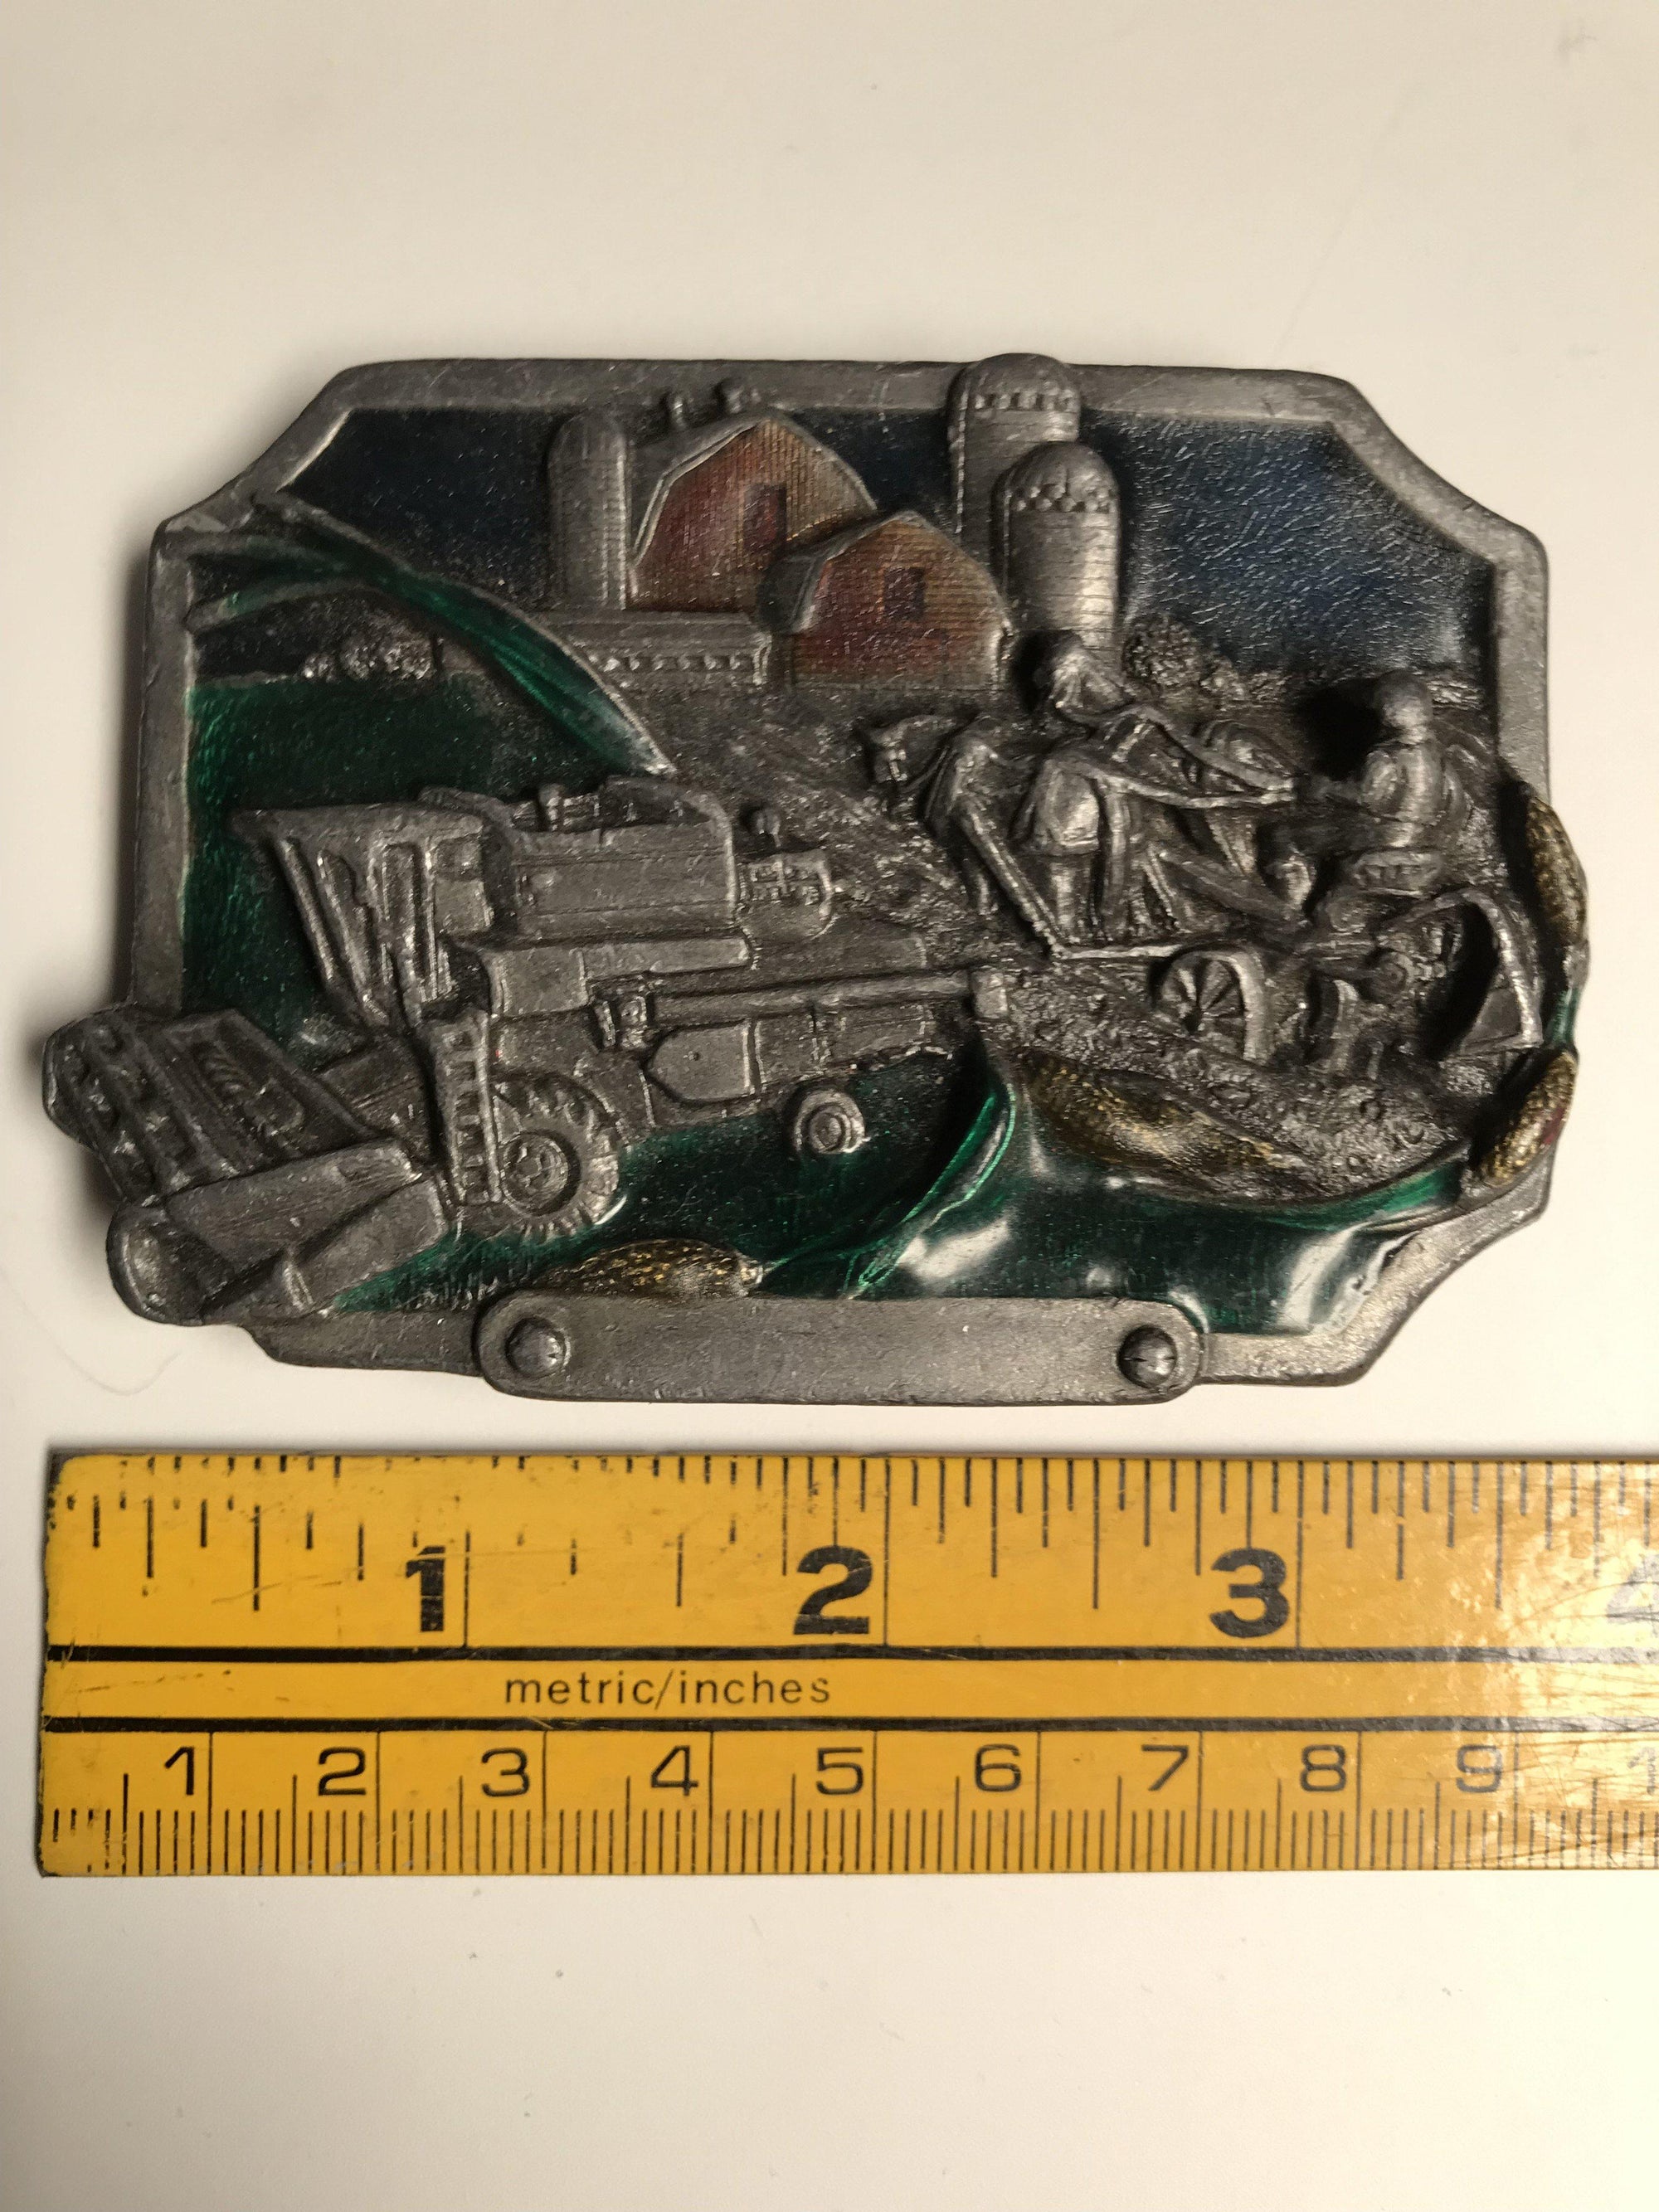 A Square Dance Buckle with a picture of a train on it, manufactured by Square Up Fashions.